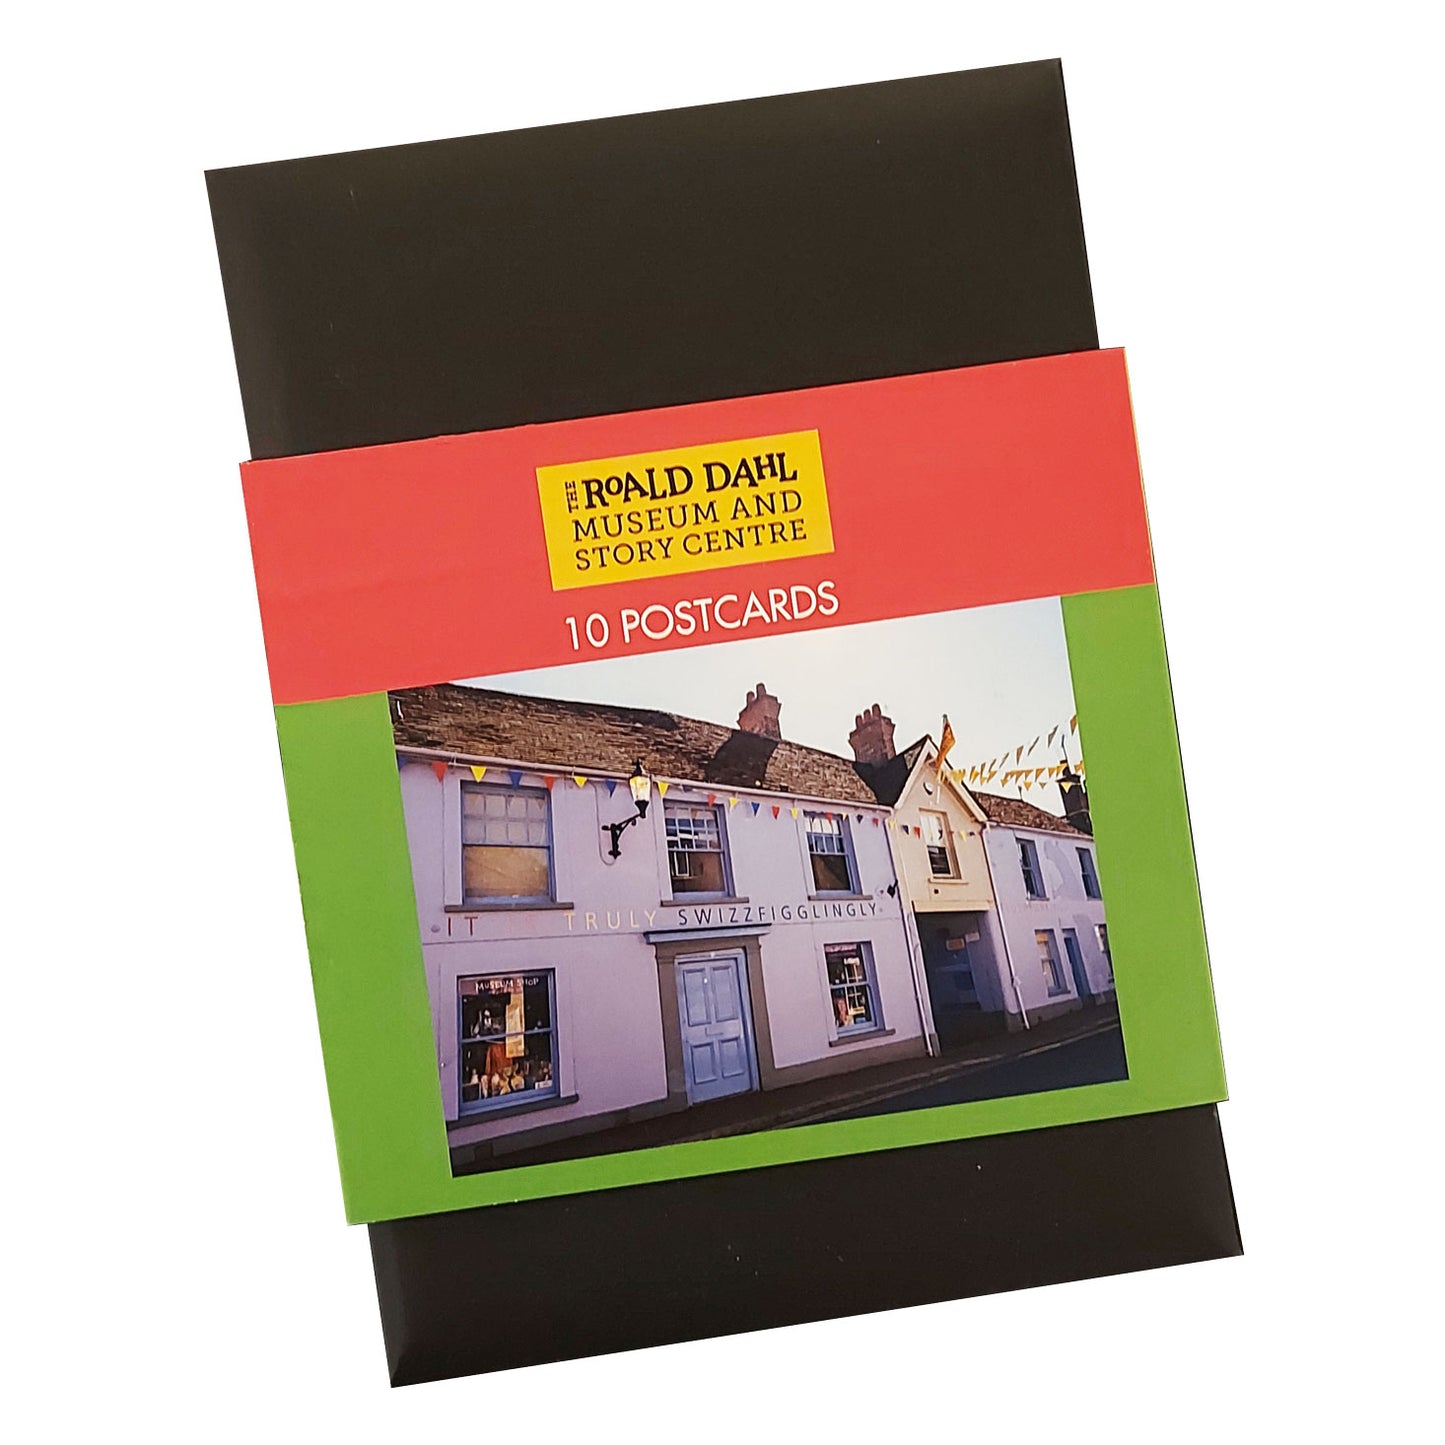 Set of 10 postcards from the Roald Dahl Museum and Story Centre